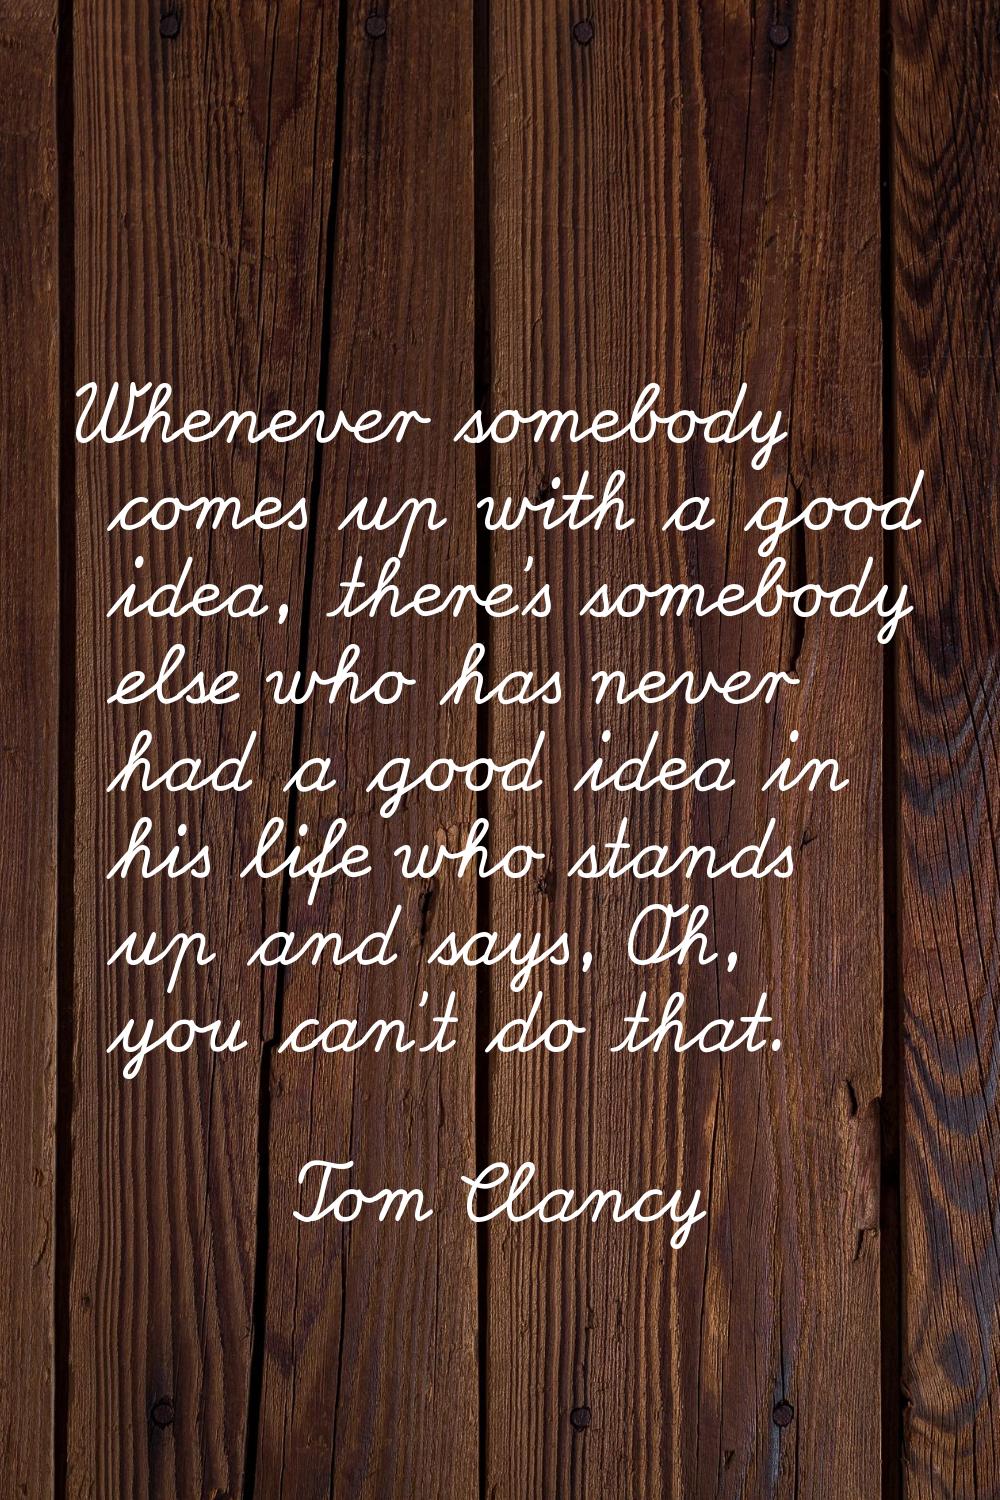 Whenever somebody comes up with a good idea, there's somebody else who has never had a good idea in